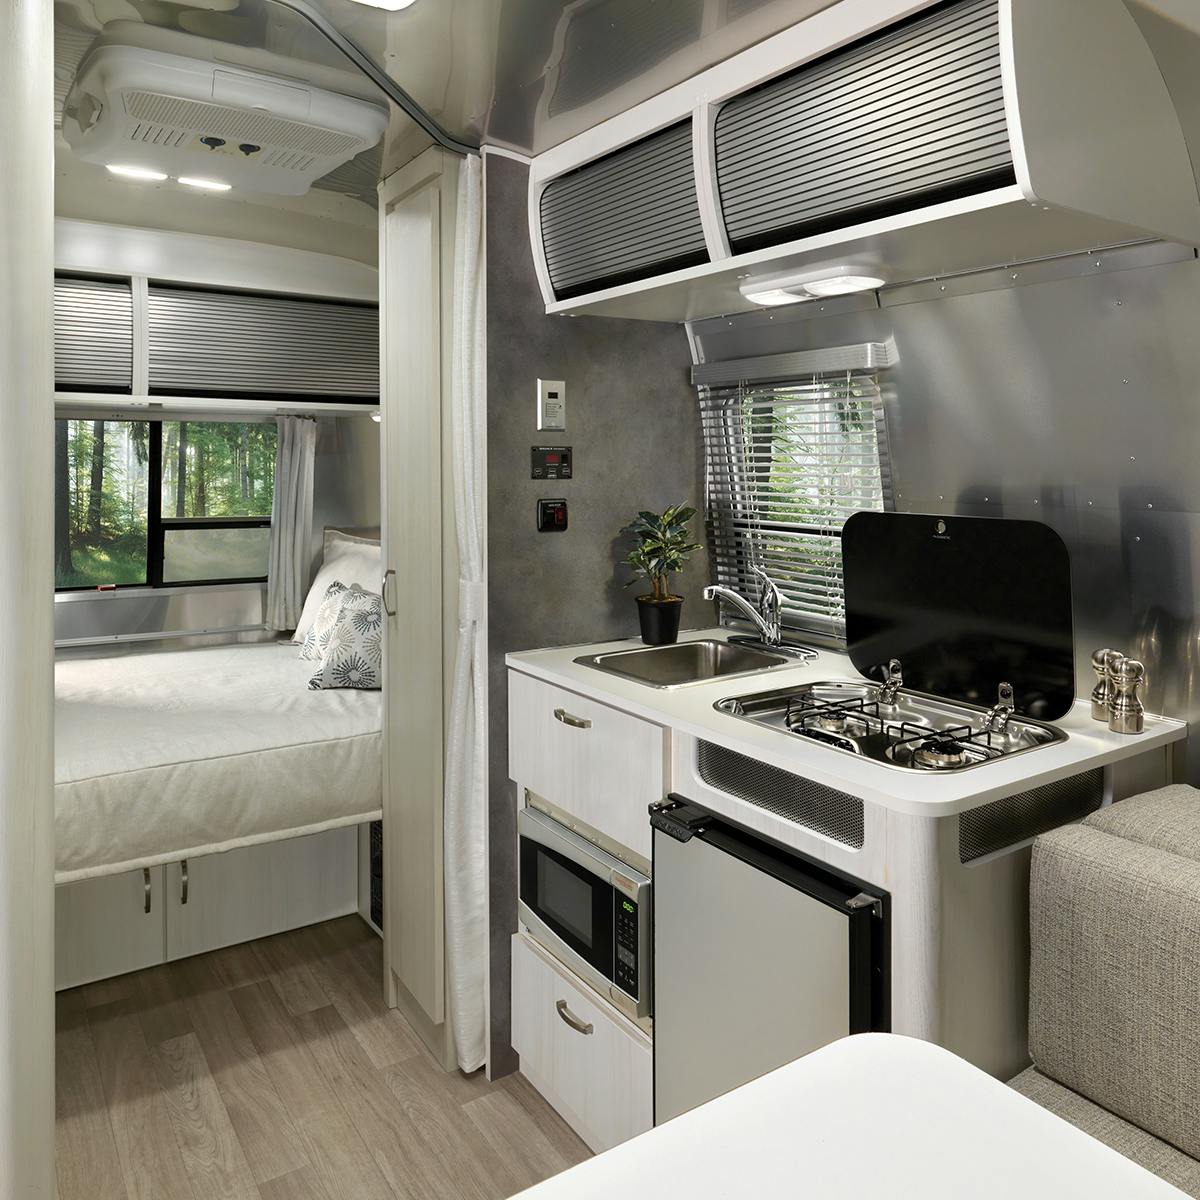 Bambi 16RB Floor Plan | Travel Trailers | Airstream